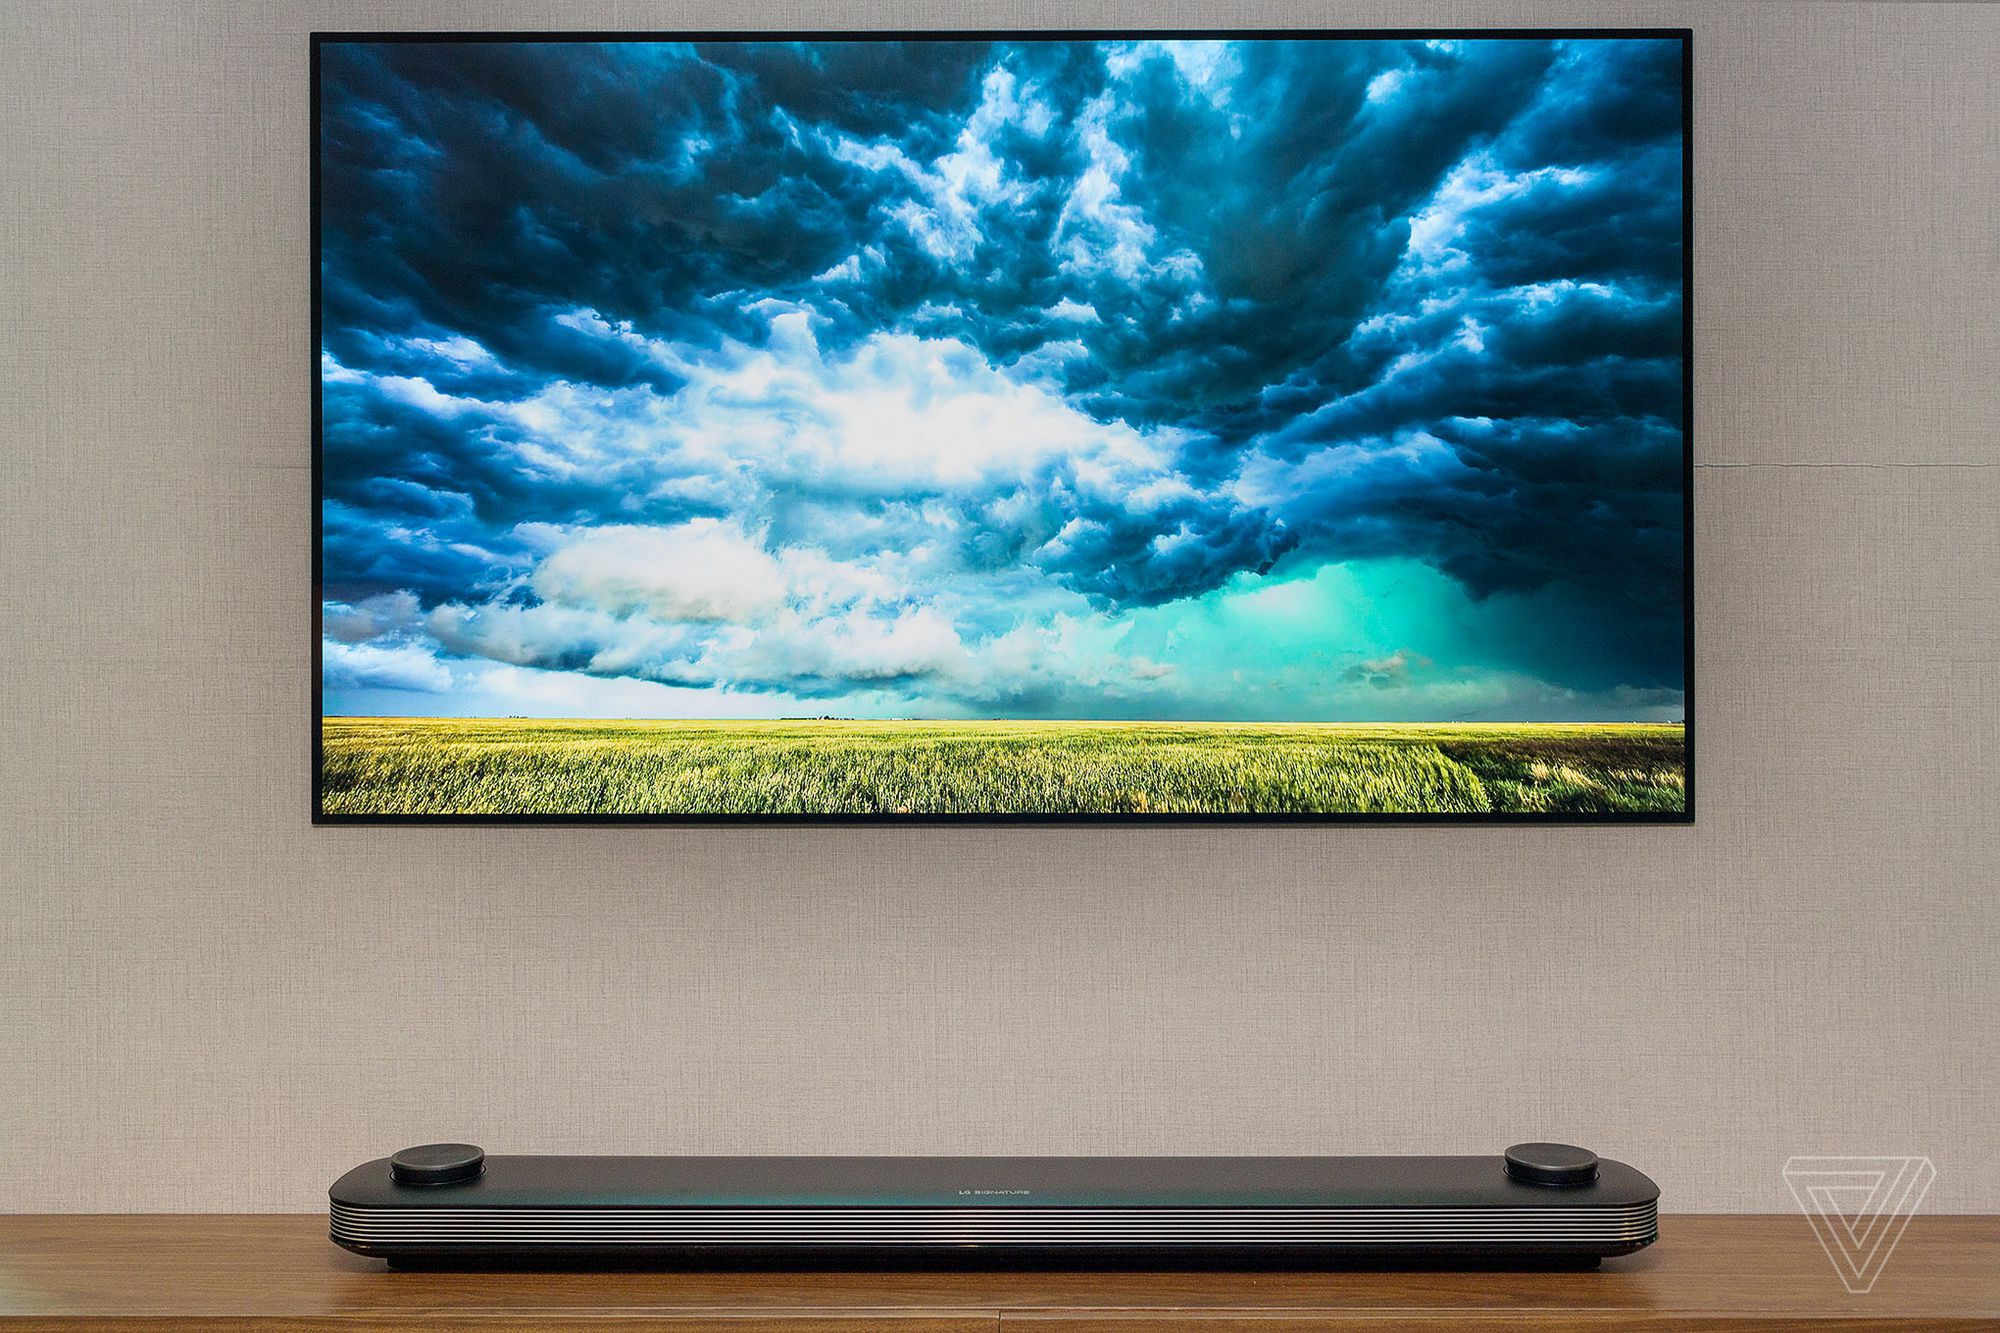 LG's new 77-inch OLED wallpaper TV is now available for the price of a new  car - The Verge